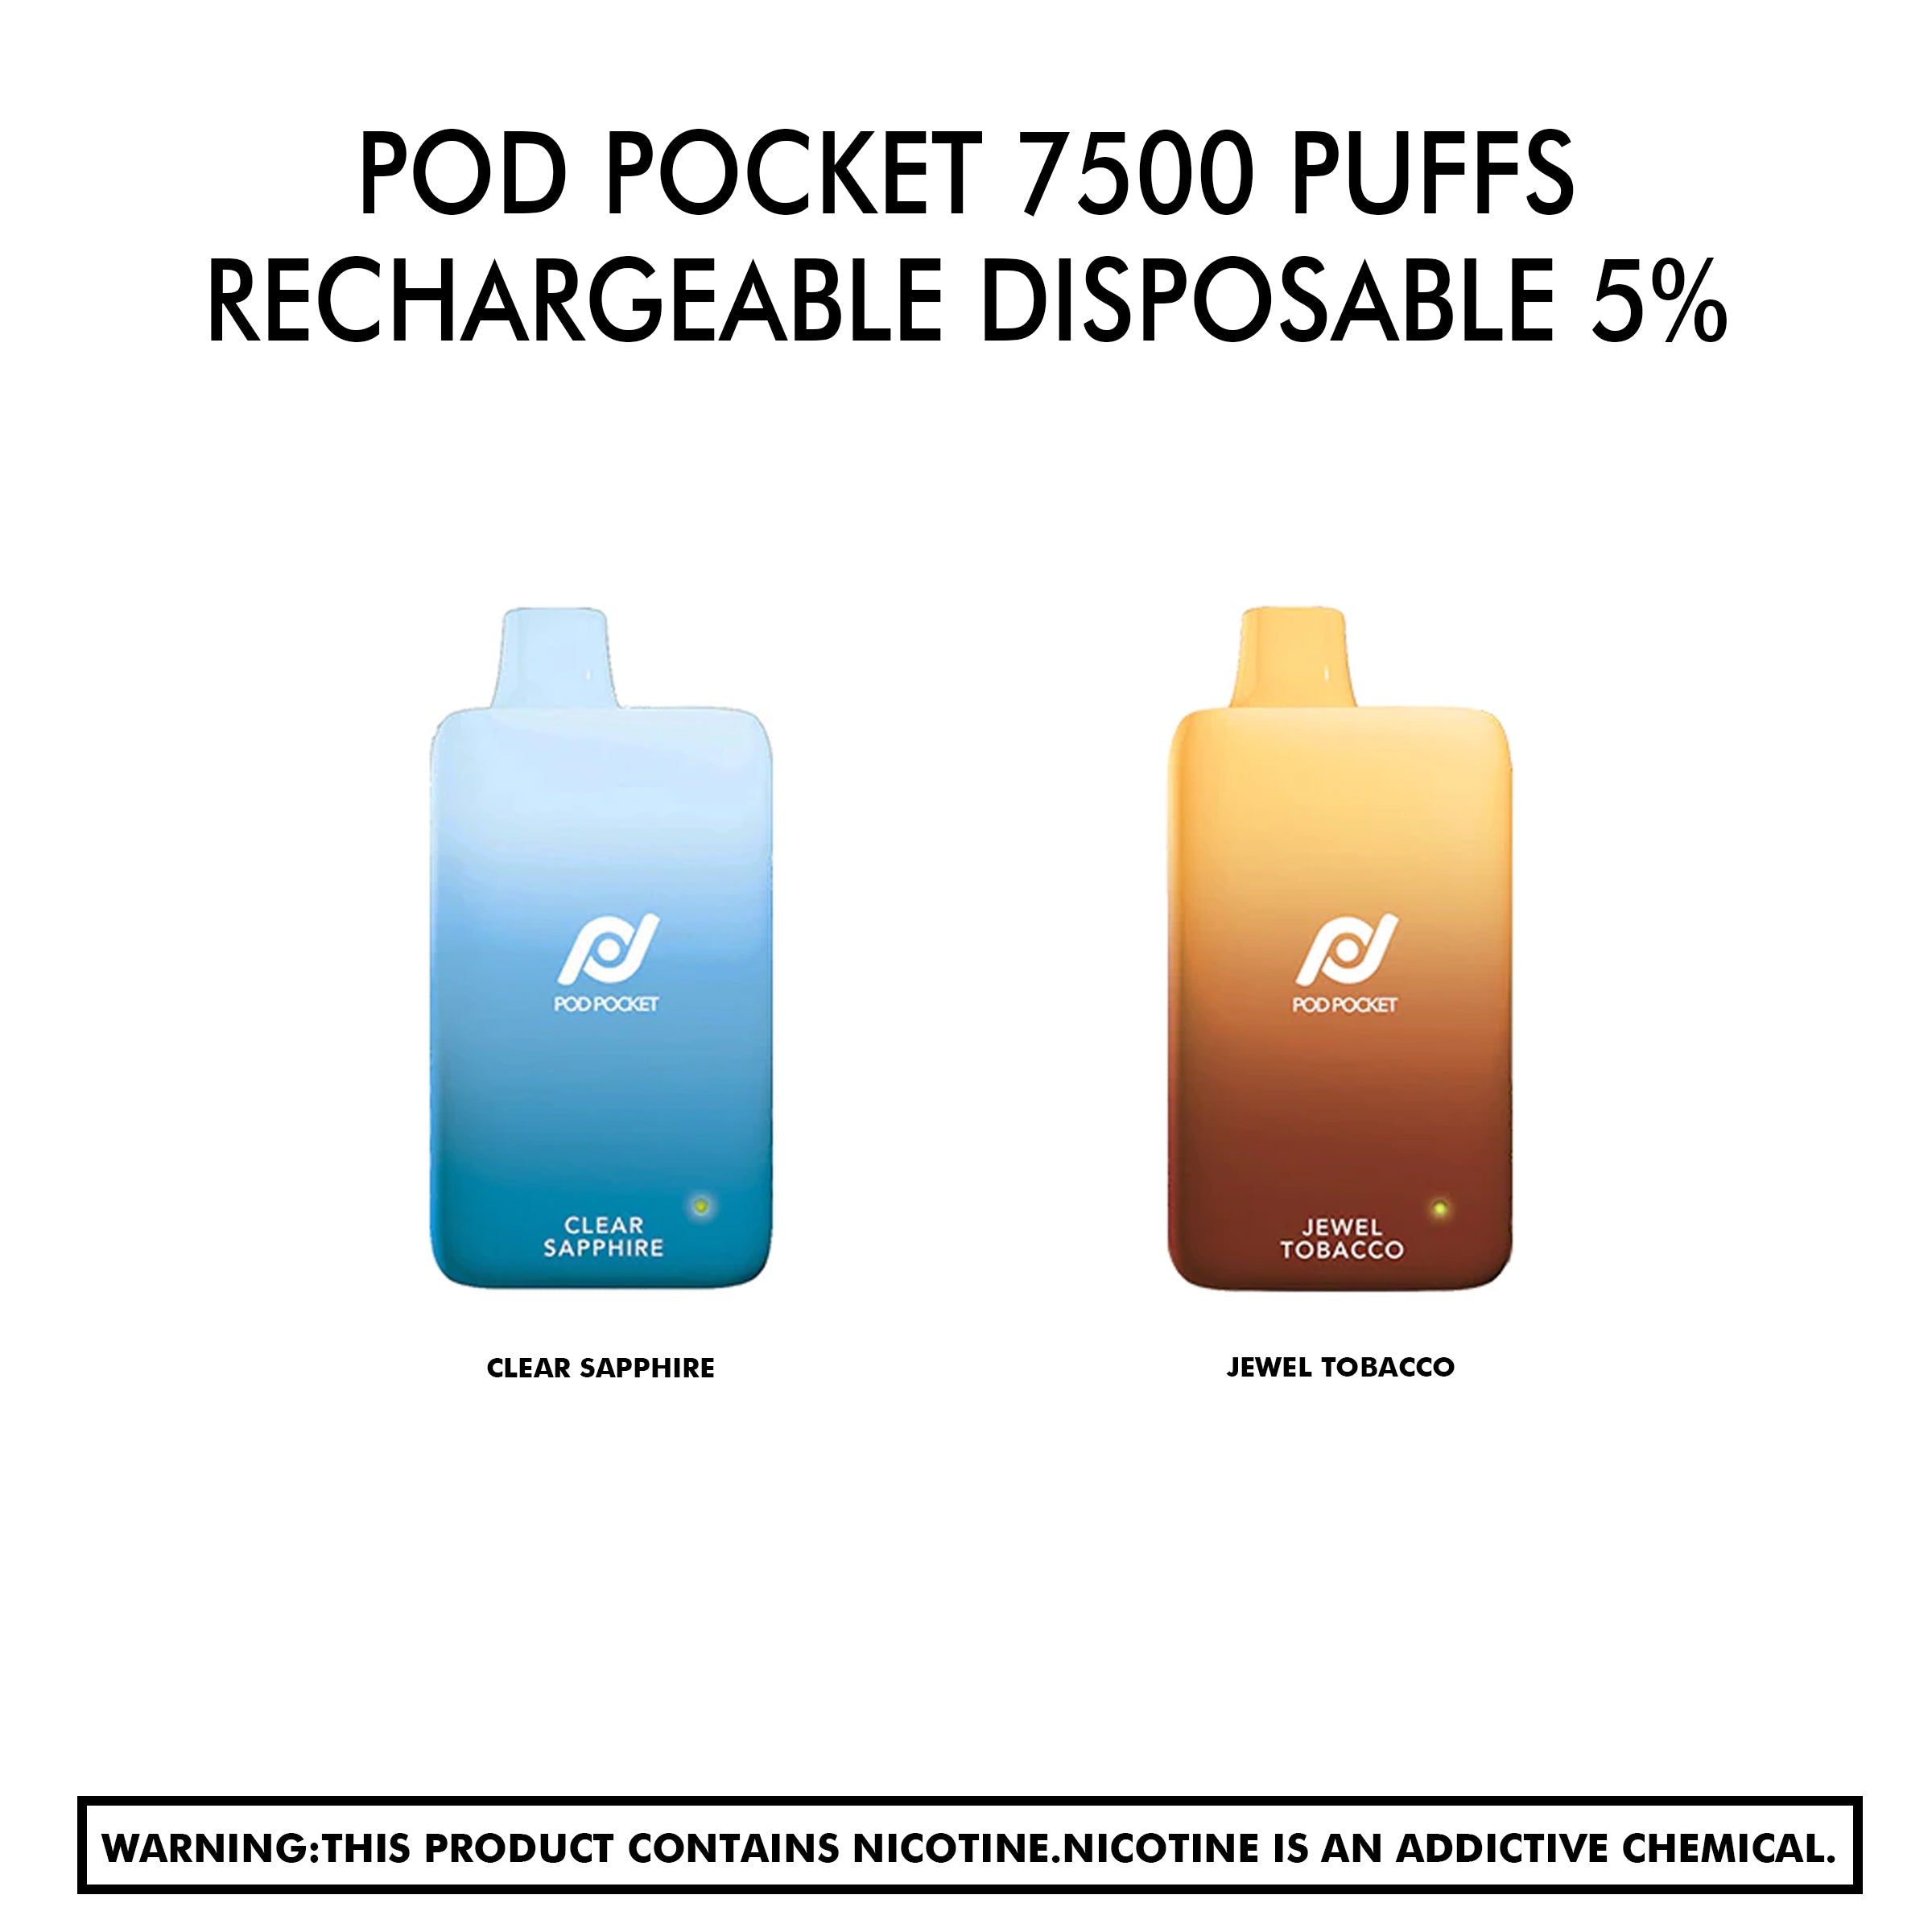 Pod Pocket 7500 Puffs Rechargeable Disposable 5%